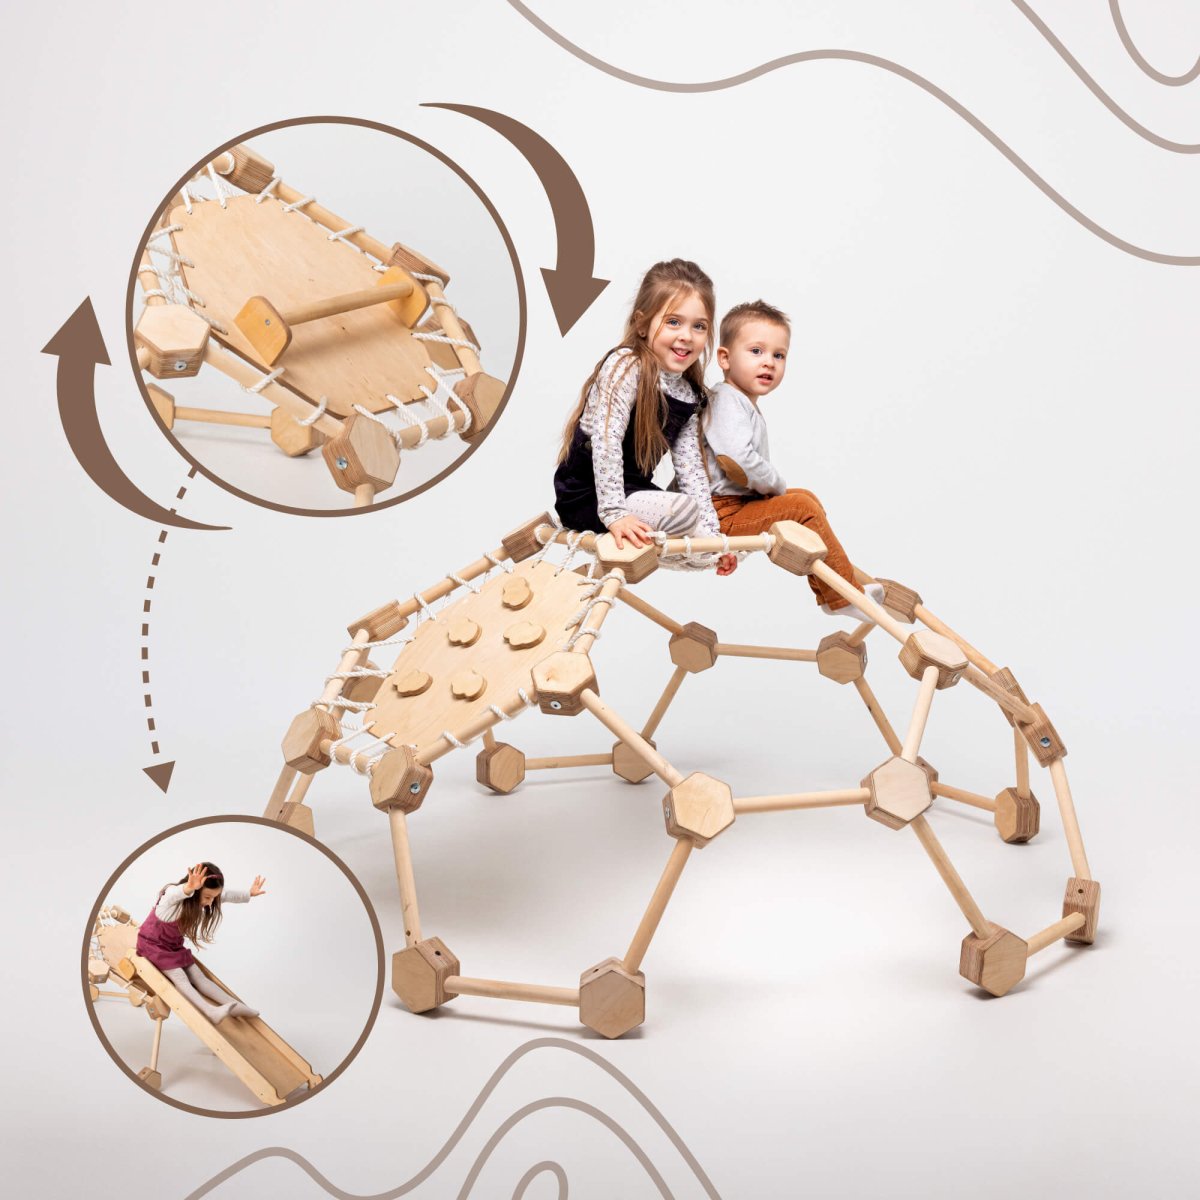 Wooden Climbing Frame Geodome / Climbing Dome for Kids 2-6 y.o. by Goodevas